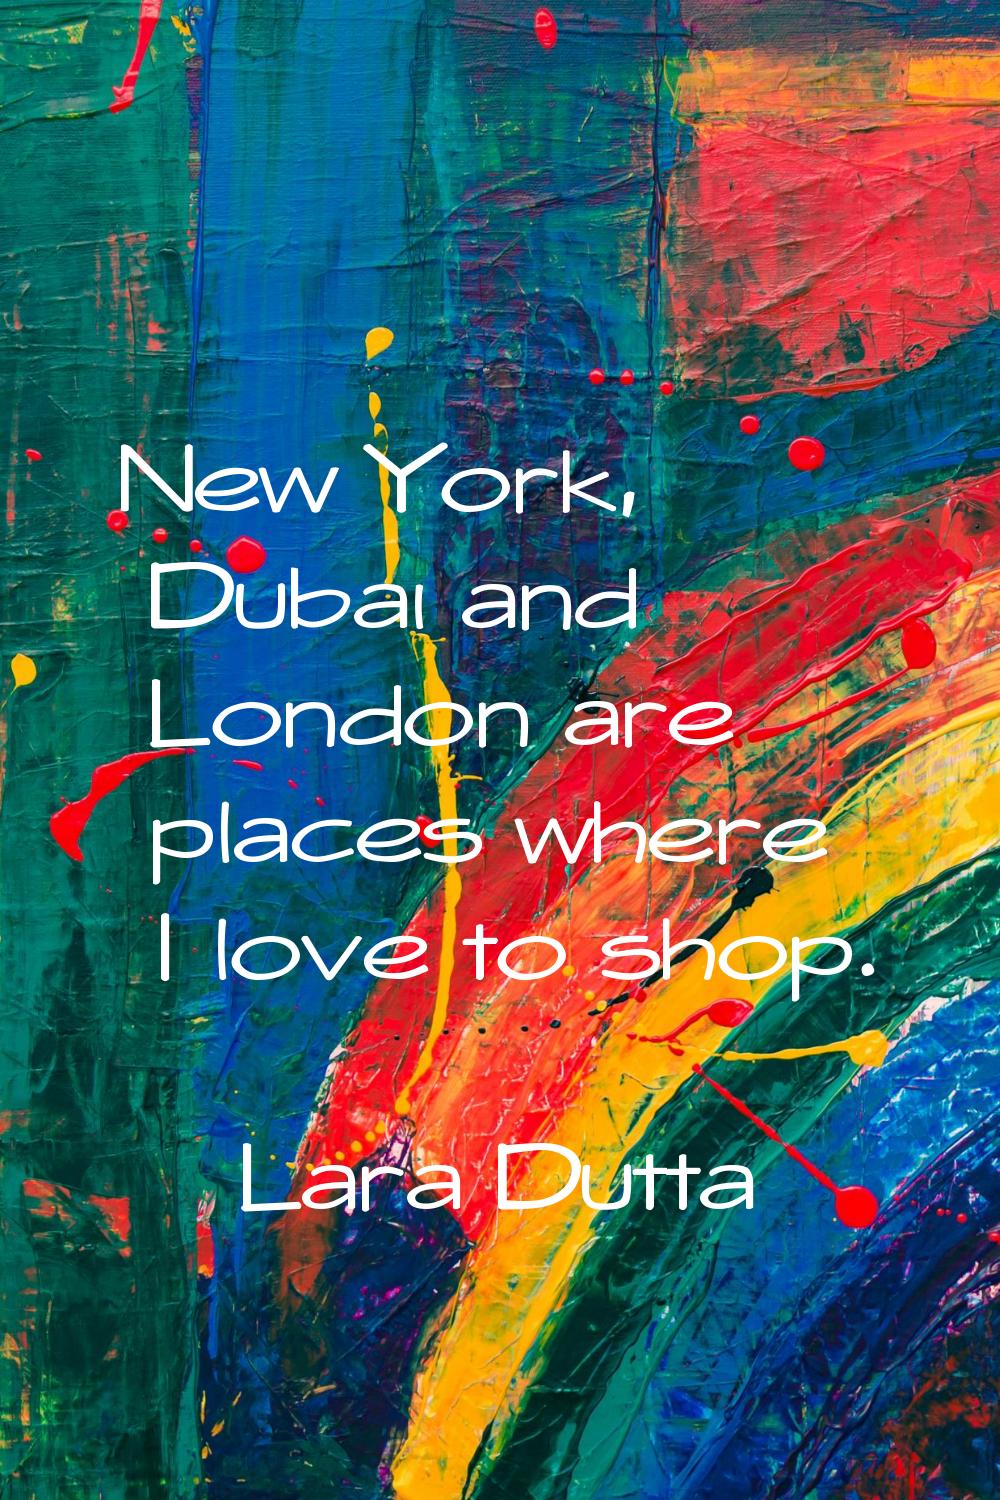 New York, Dubai and London are places where I love to shop.